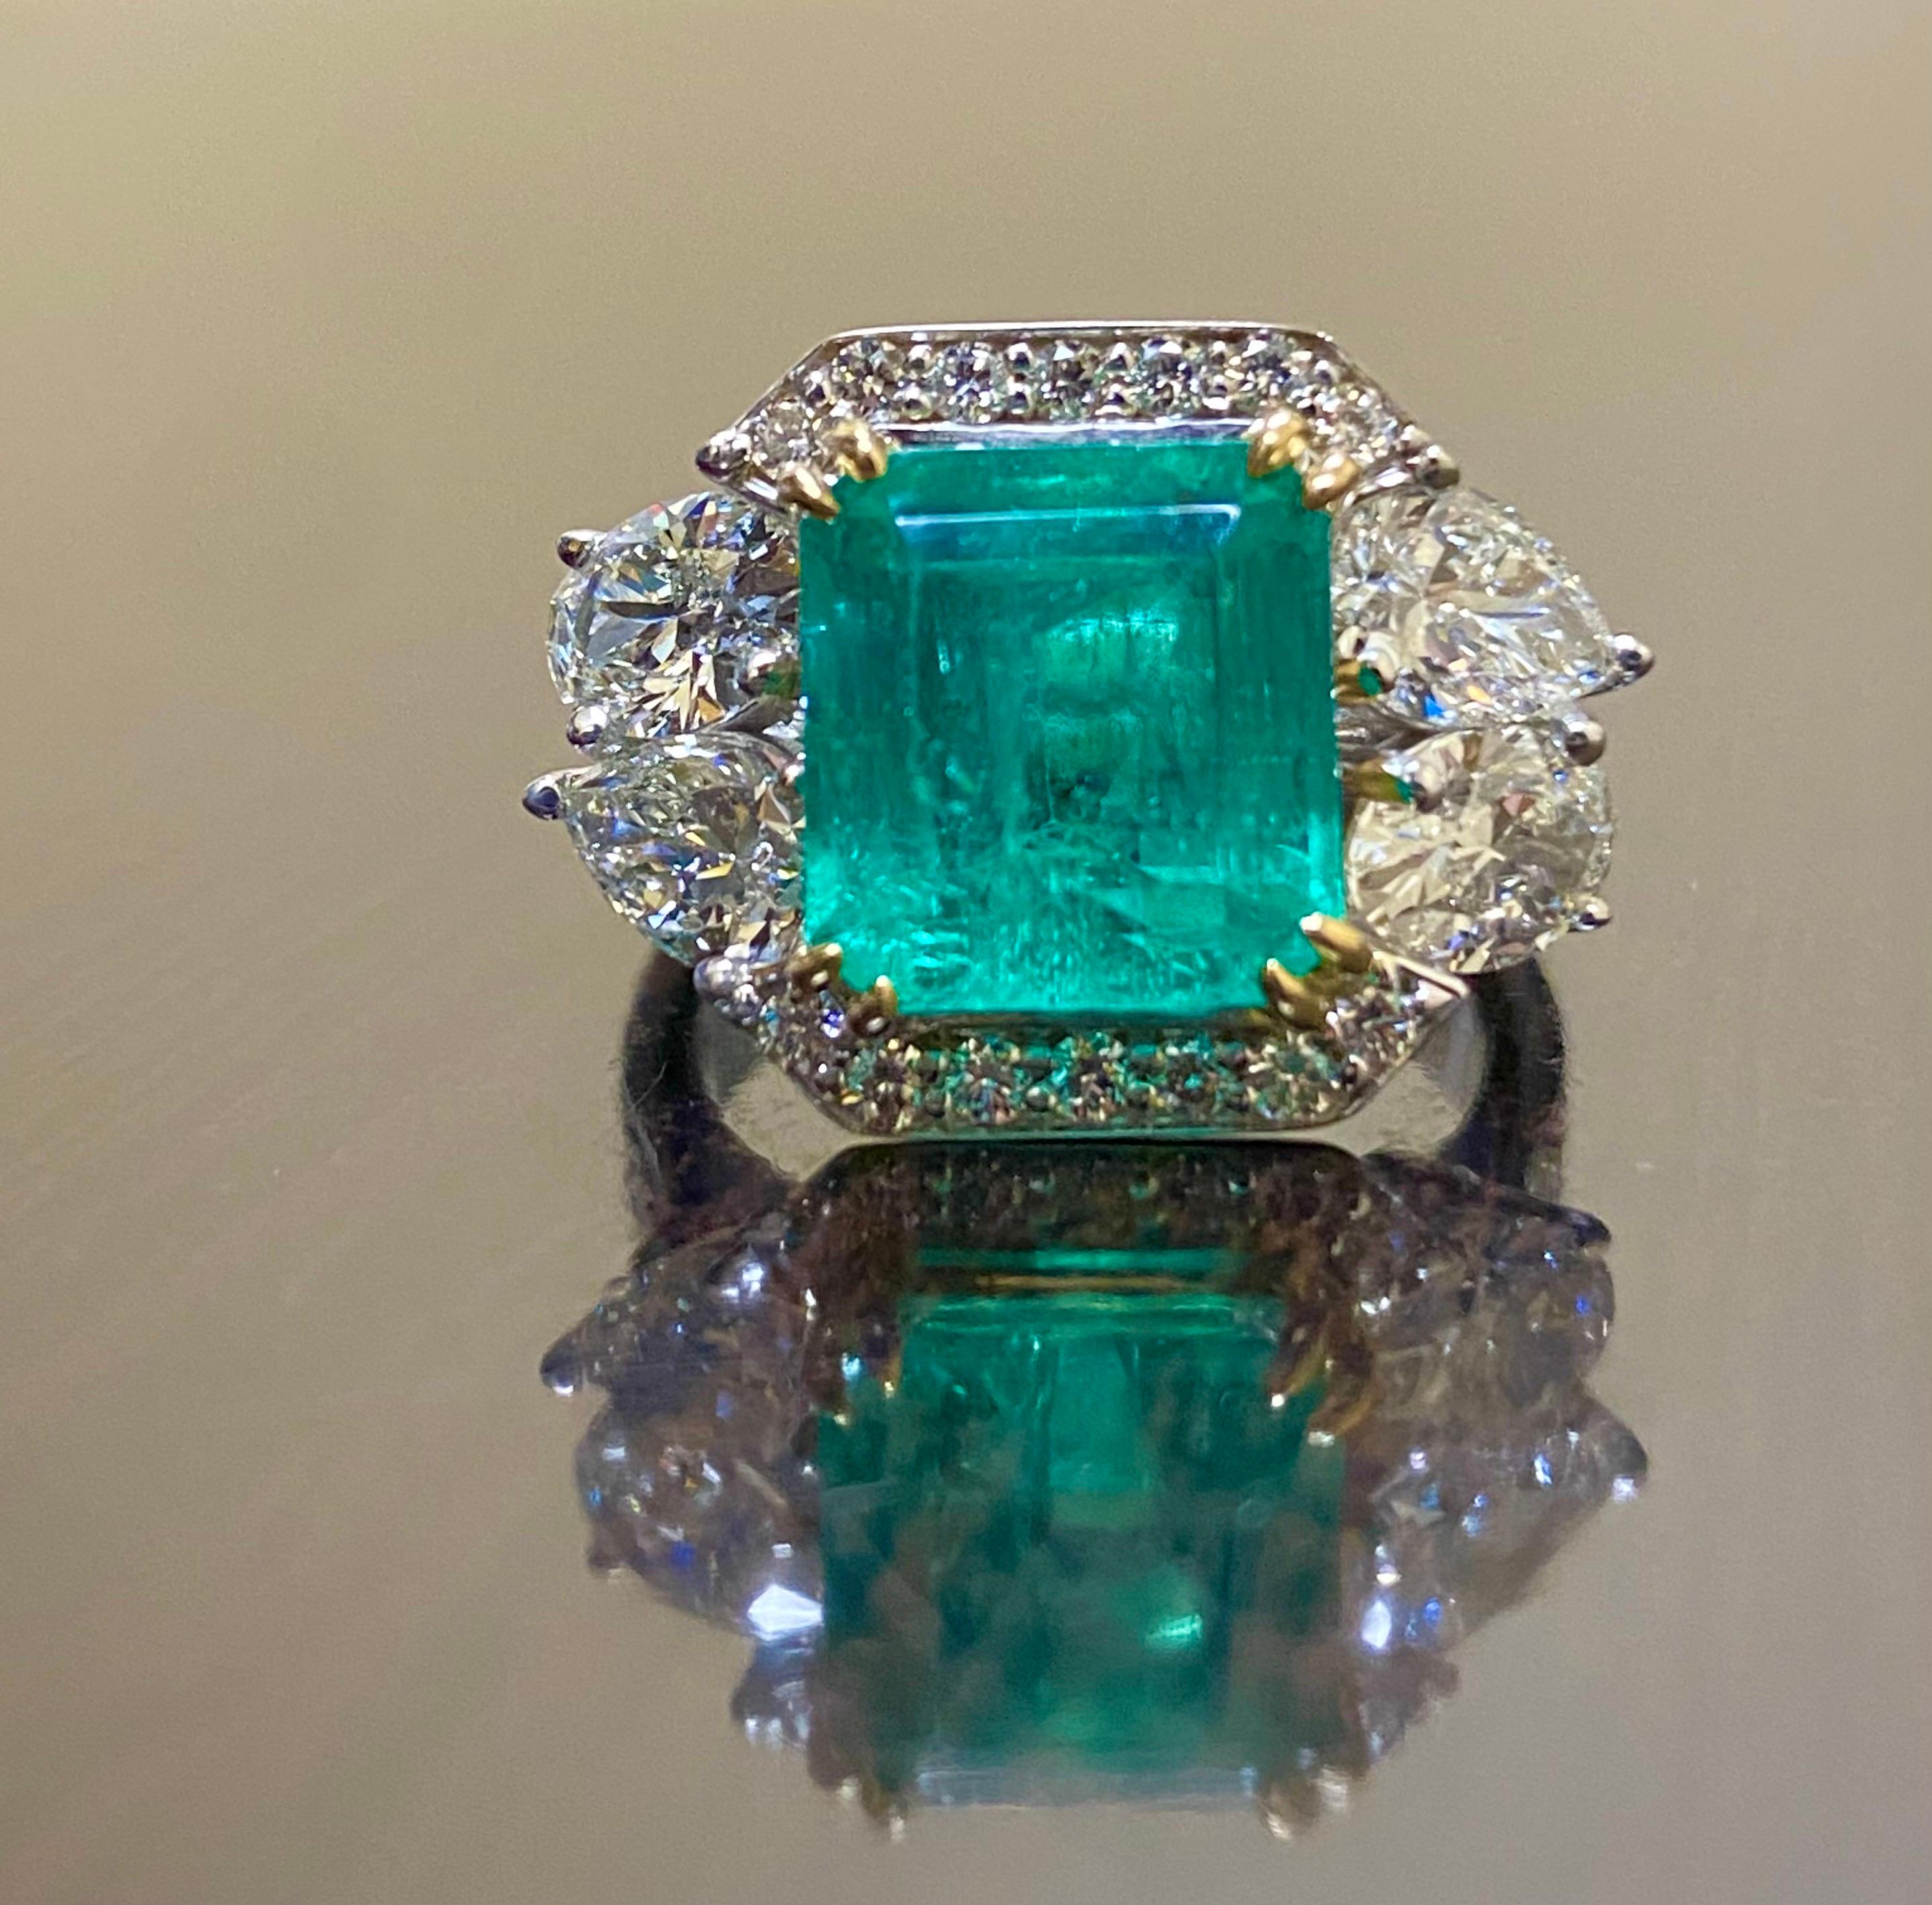 18K White Gold GIA Certified 4.87 Carat Colombian Emerald Diamond Ring For Sale 1